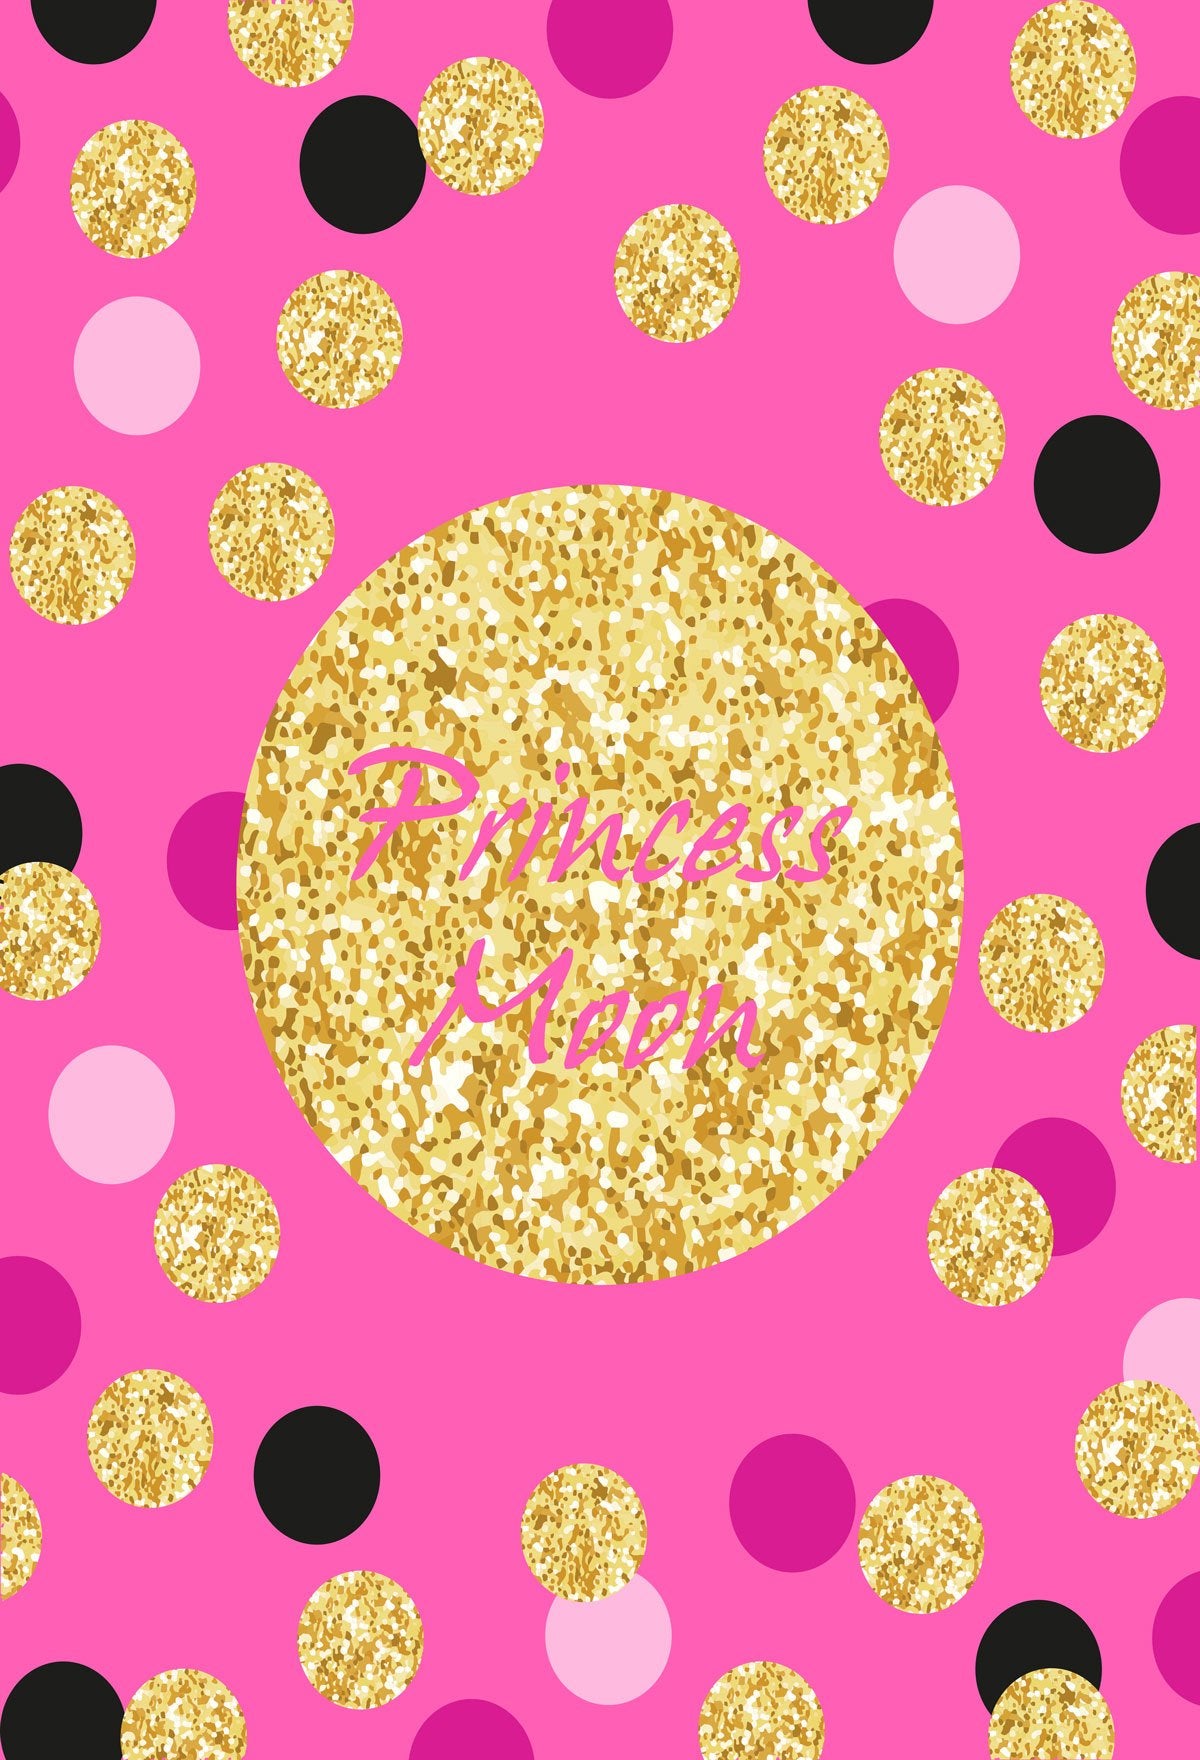 Birthday Party Pink backdrop with black golden and white Dots - Kate backdrops UK